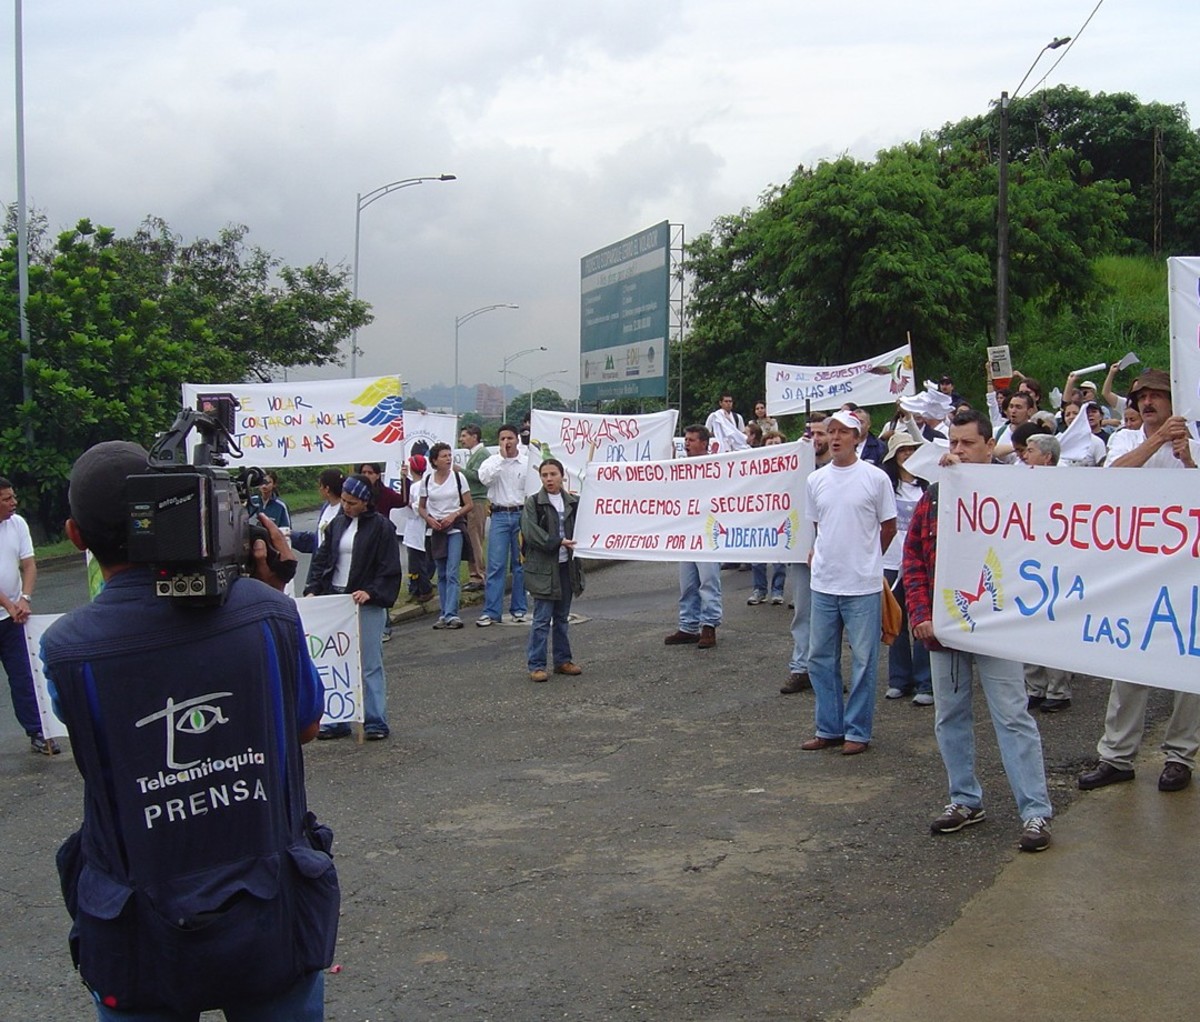 Protesters on a city street in Colombia holding picket signs.